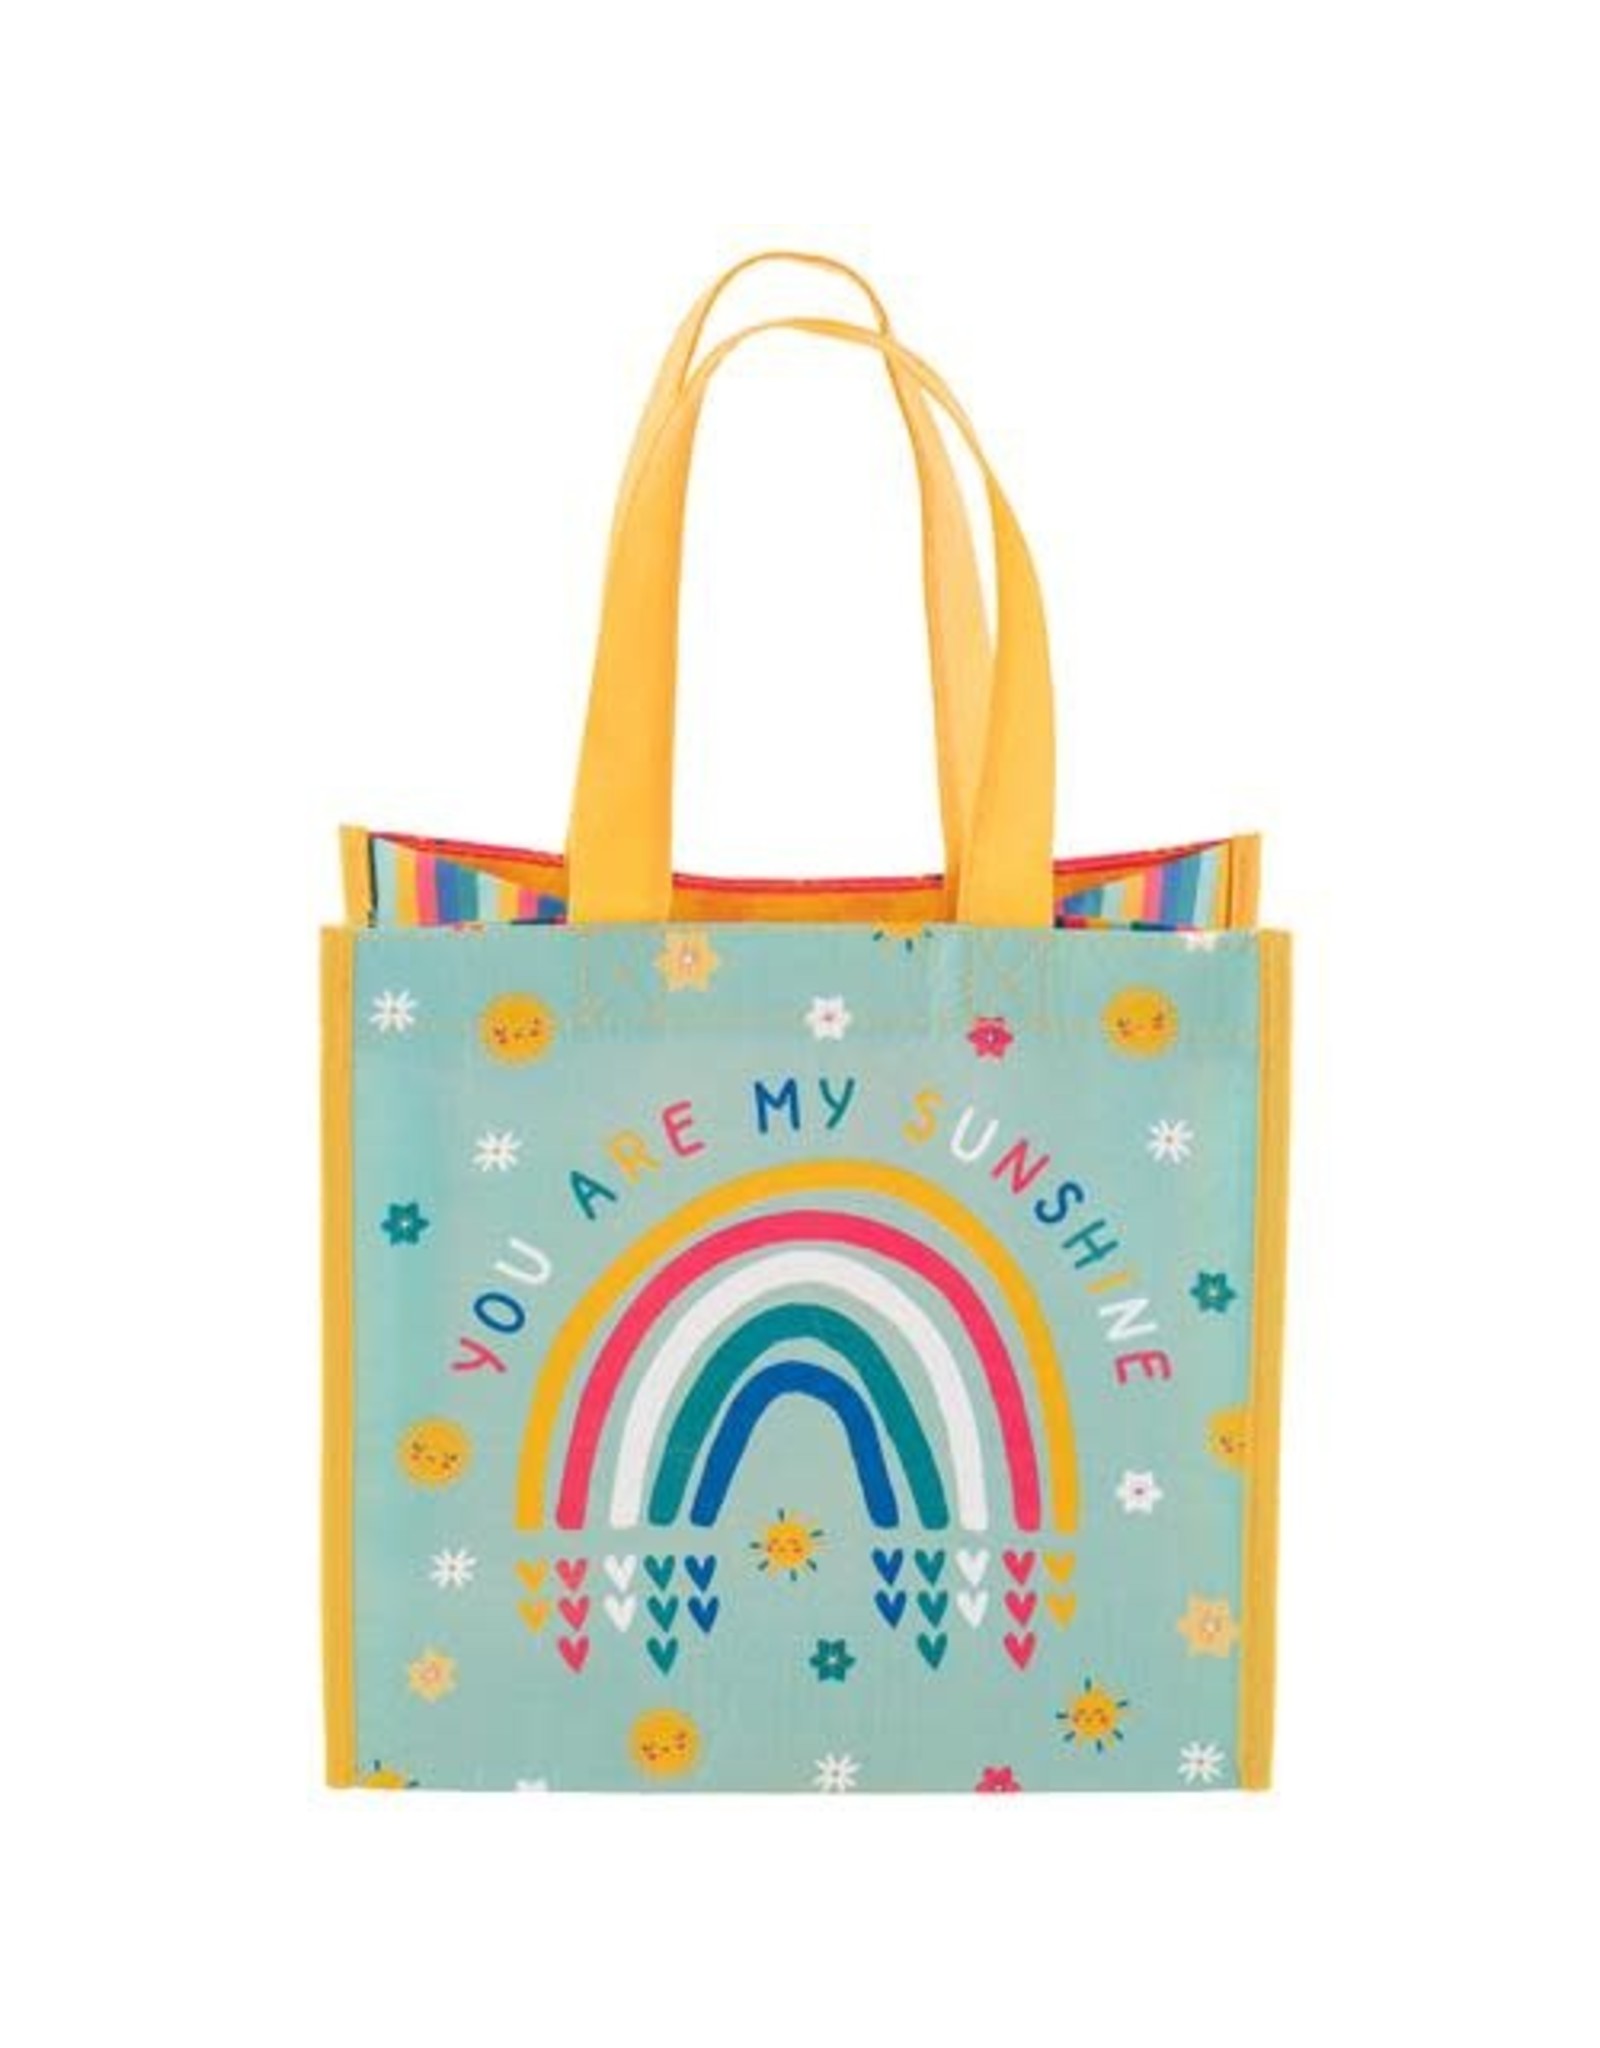 Stephen Joseph Small Recycled Gift Bag - You Are My Sunshine